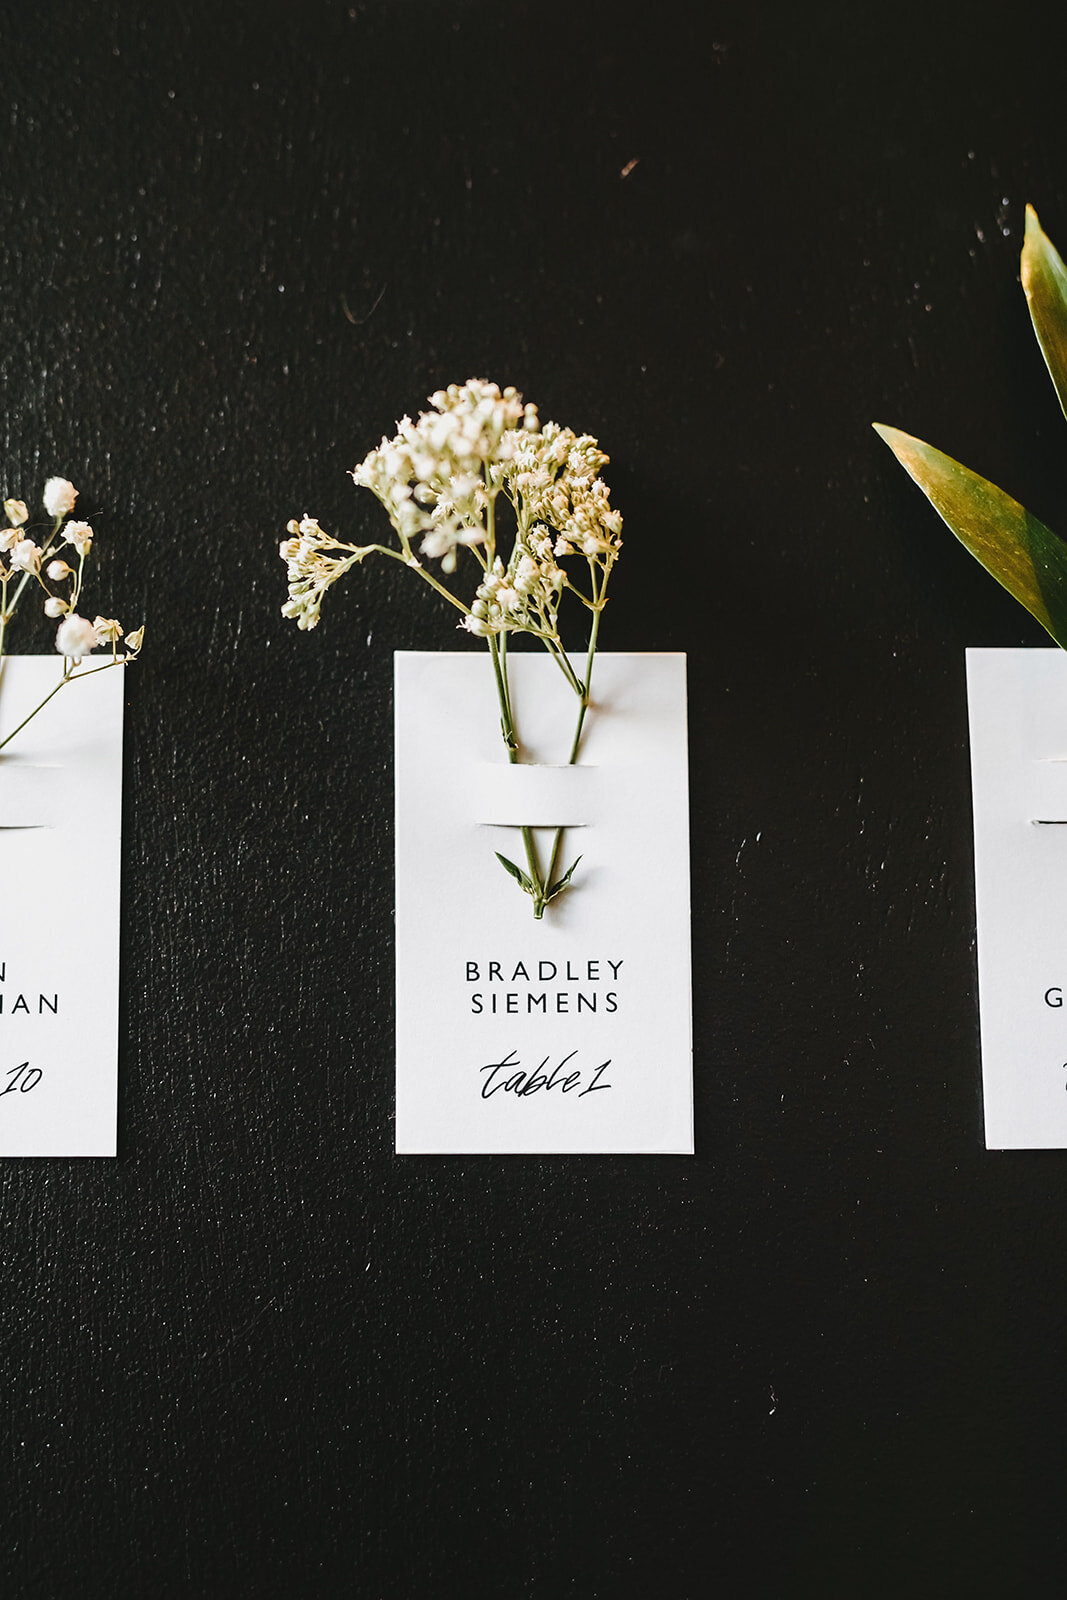 LBV Design House Wedding Design Planning Day-Of Signage Paper Goods Shoppable Accessories Wedding Day Austin, Texas beyond Valerie Strenk Lettered by Valerie Hand Lettering5